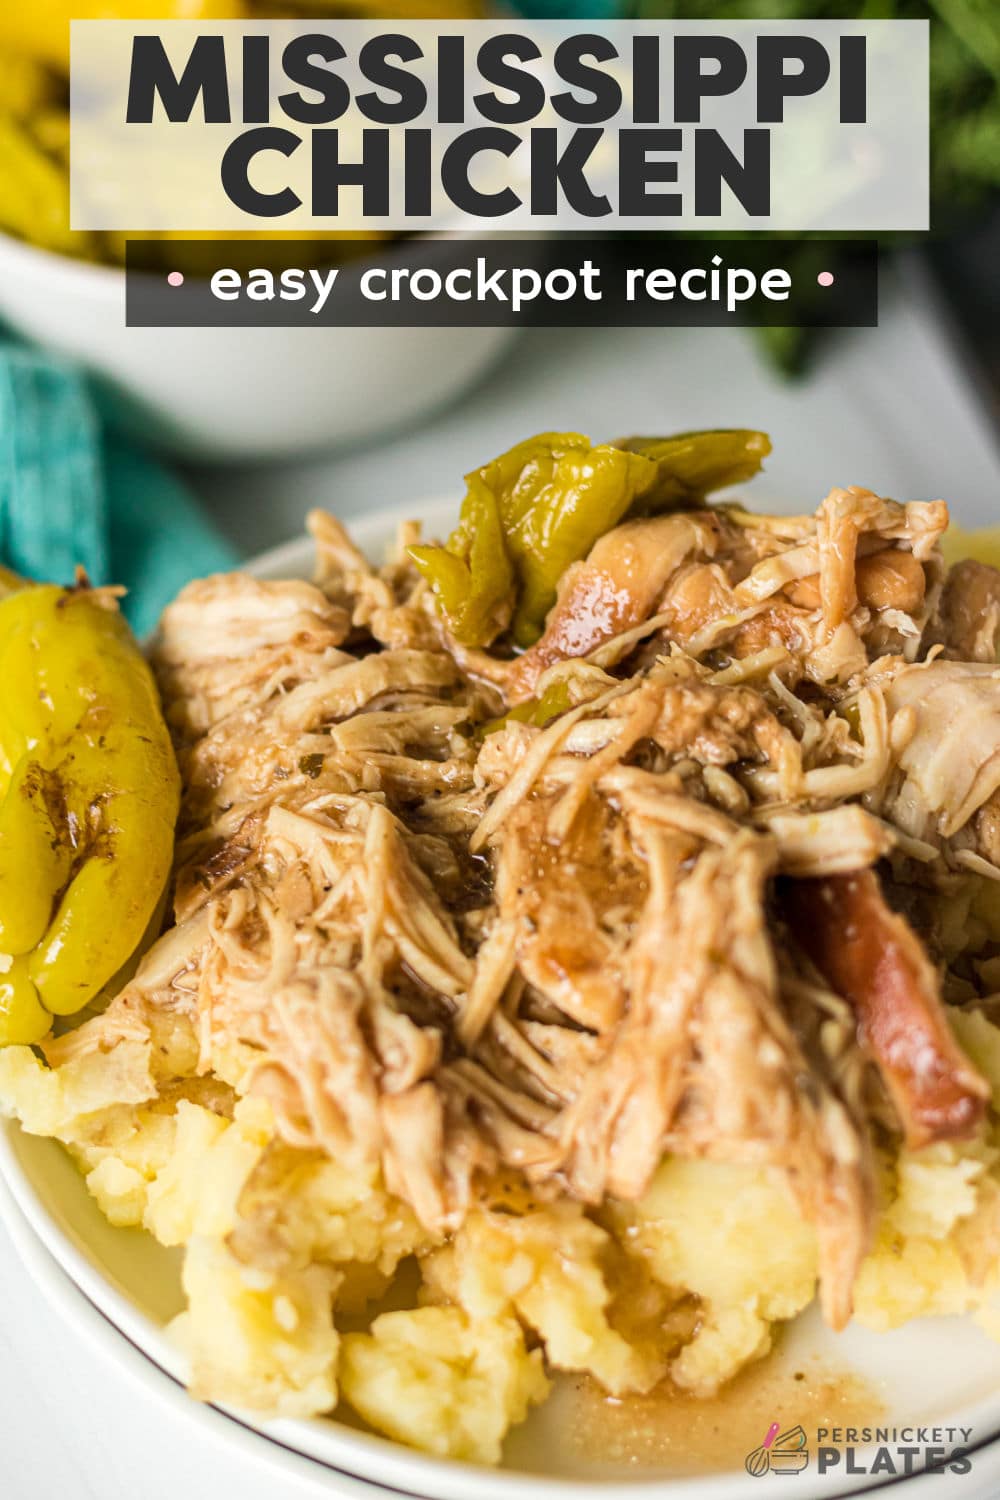 This recipe is the chicken version of the classic Mississippi pot roast. We're replacing chuck roast with chicken breasts for a lighter, yet just as flavorful twist! Slow cooker Mississippi chicken is made with au jus mix, ranch seasoning, butter, and those signature pepperoncini. Cooked low and slow until the flavors come together for pure comfort food! | www.persnicketyplates.com